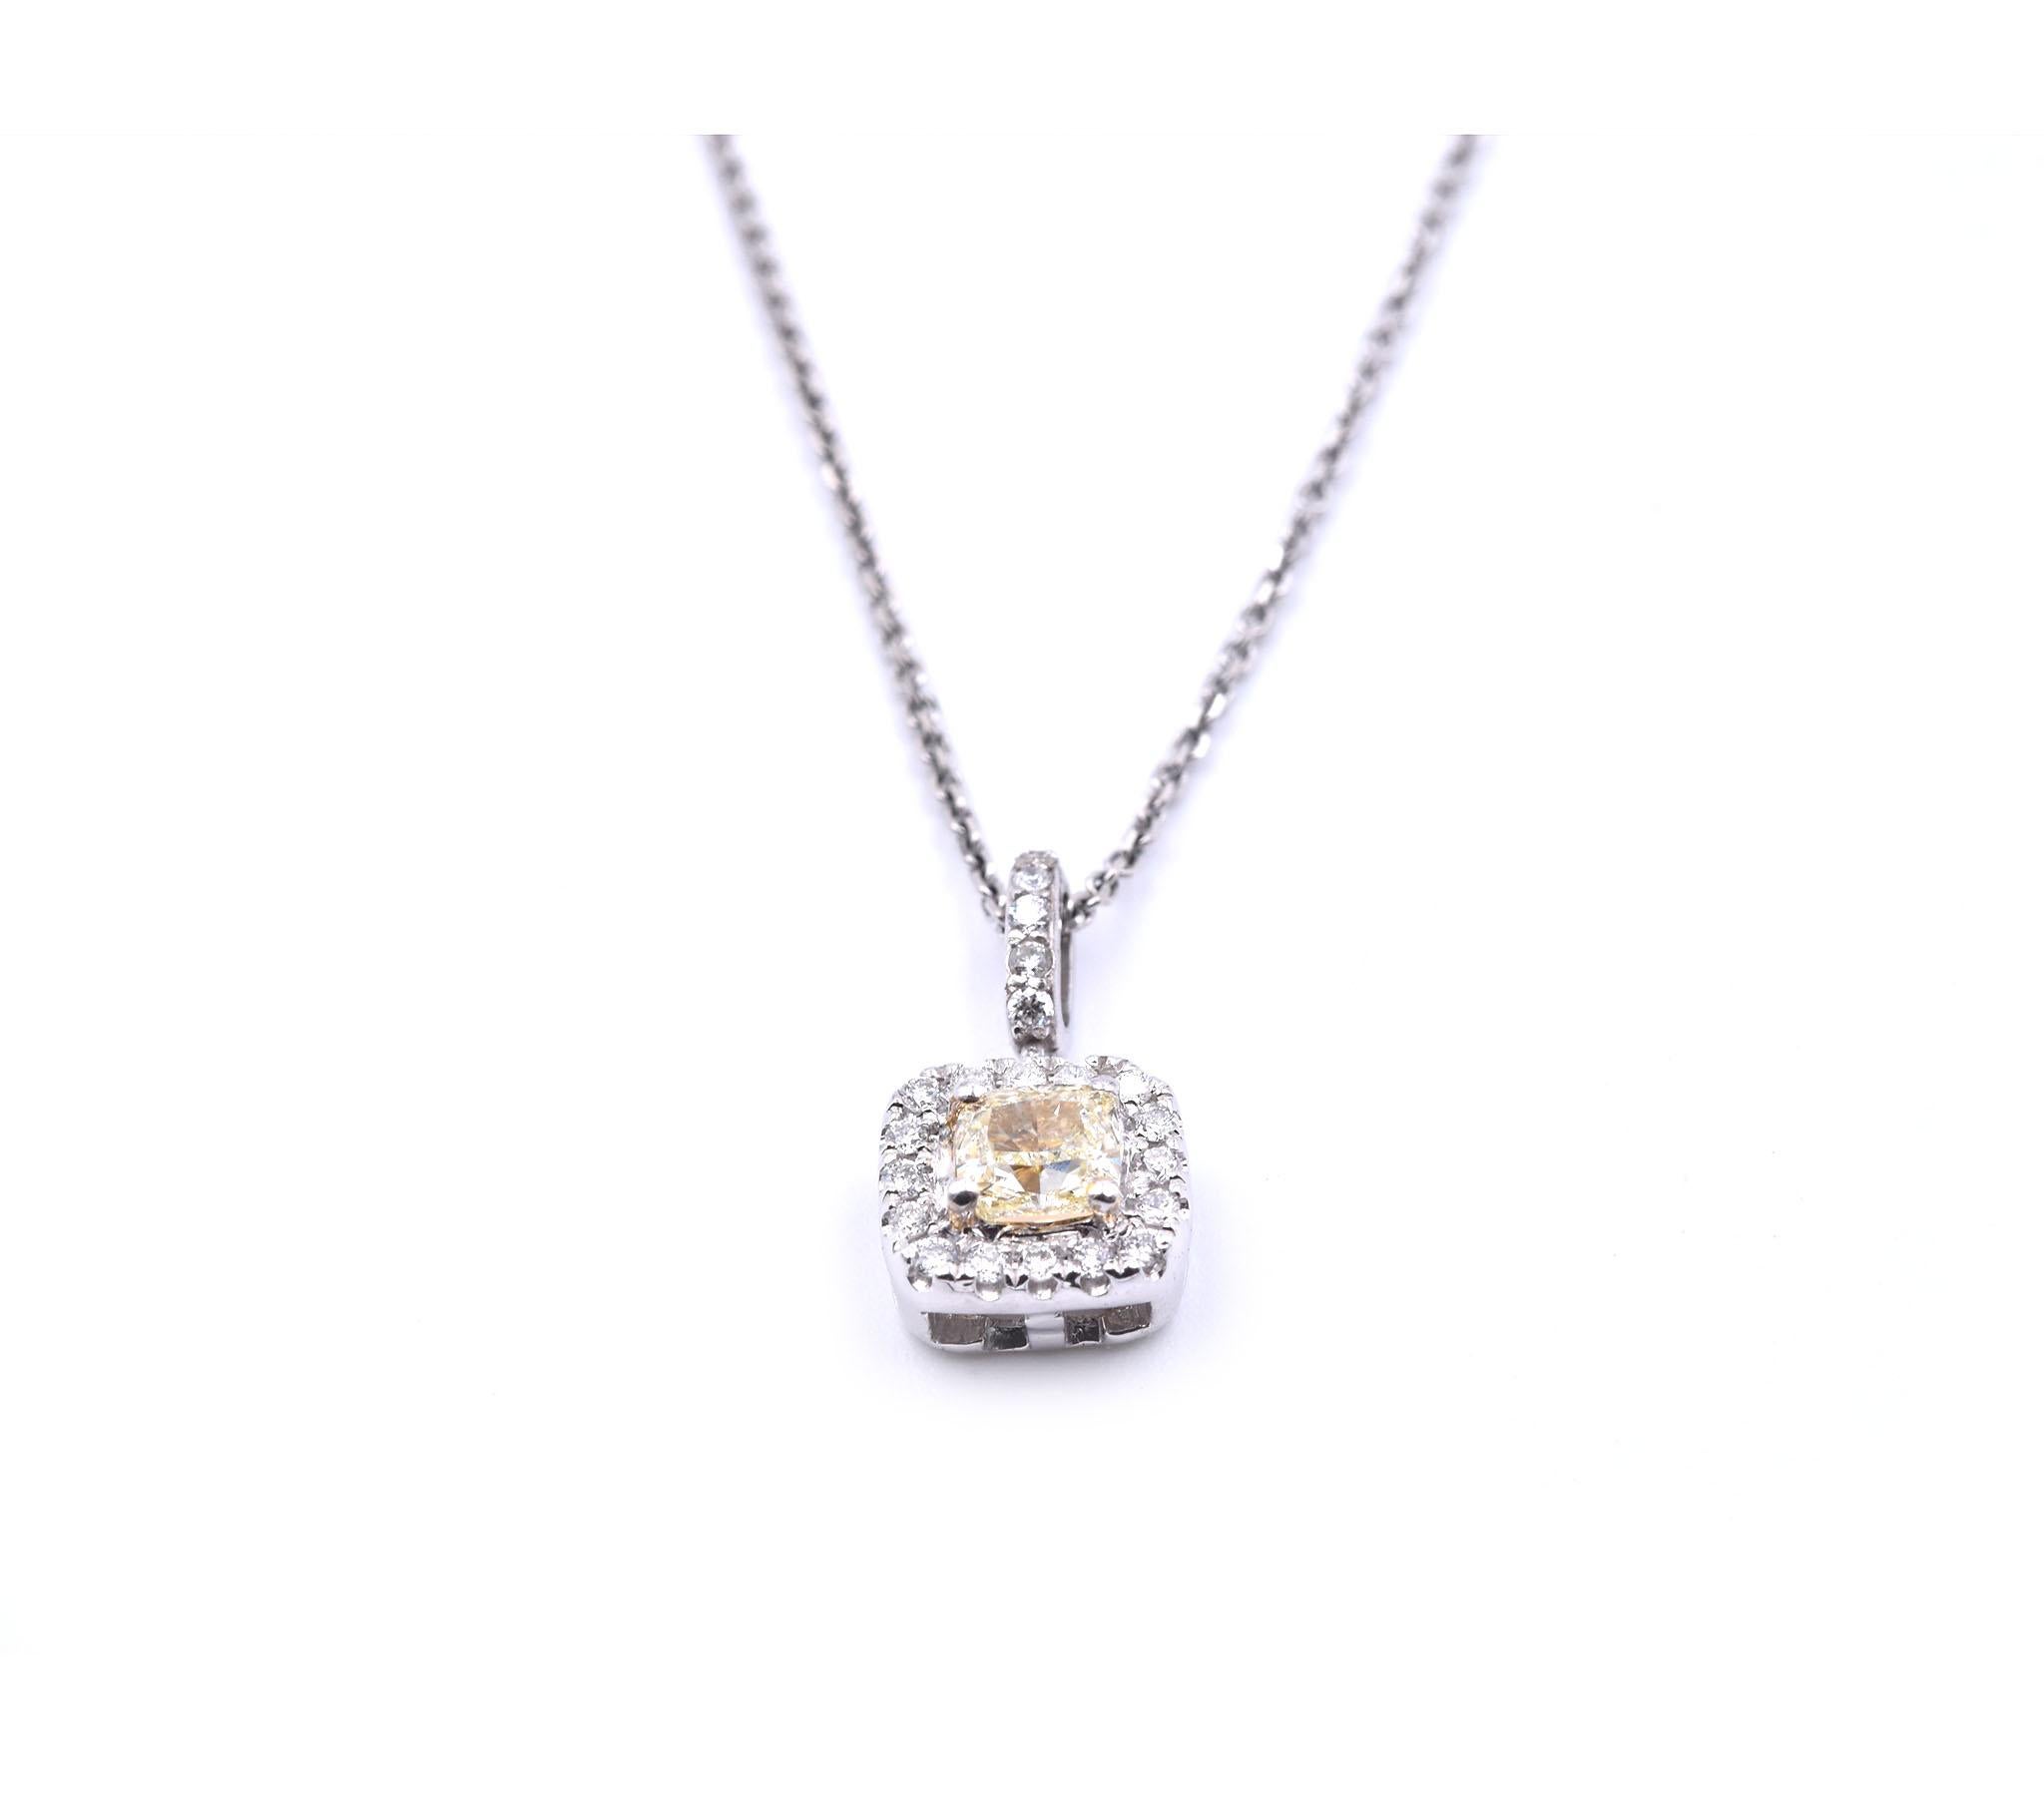 Designer: custom designed
Material: 14k white gold
Center Diamond: 1 Cushion Cut = 0.45ct
Color: Fancy Yellow
Clarity: VS1
Diamonds: 22d = 0.20cttw
Color: G
Clarity: VS
Dimensions: chain measures 16.5 inches and the pendant measures 15mm from the